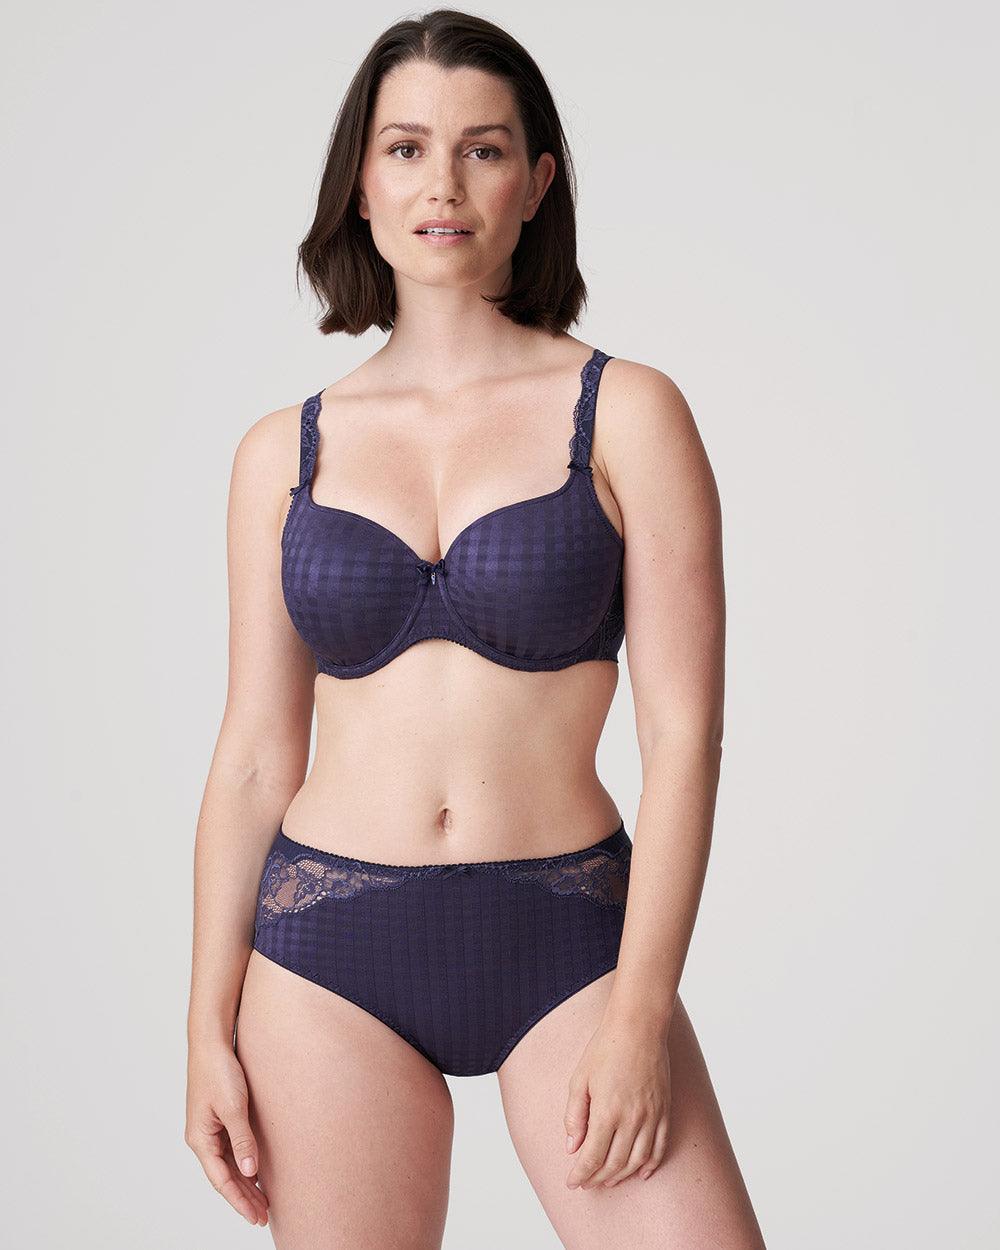 BareNecessities Prima Donna Madison Side Support Bra & Reviews